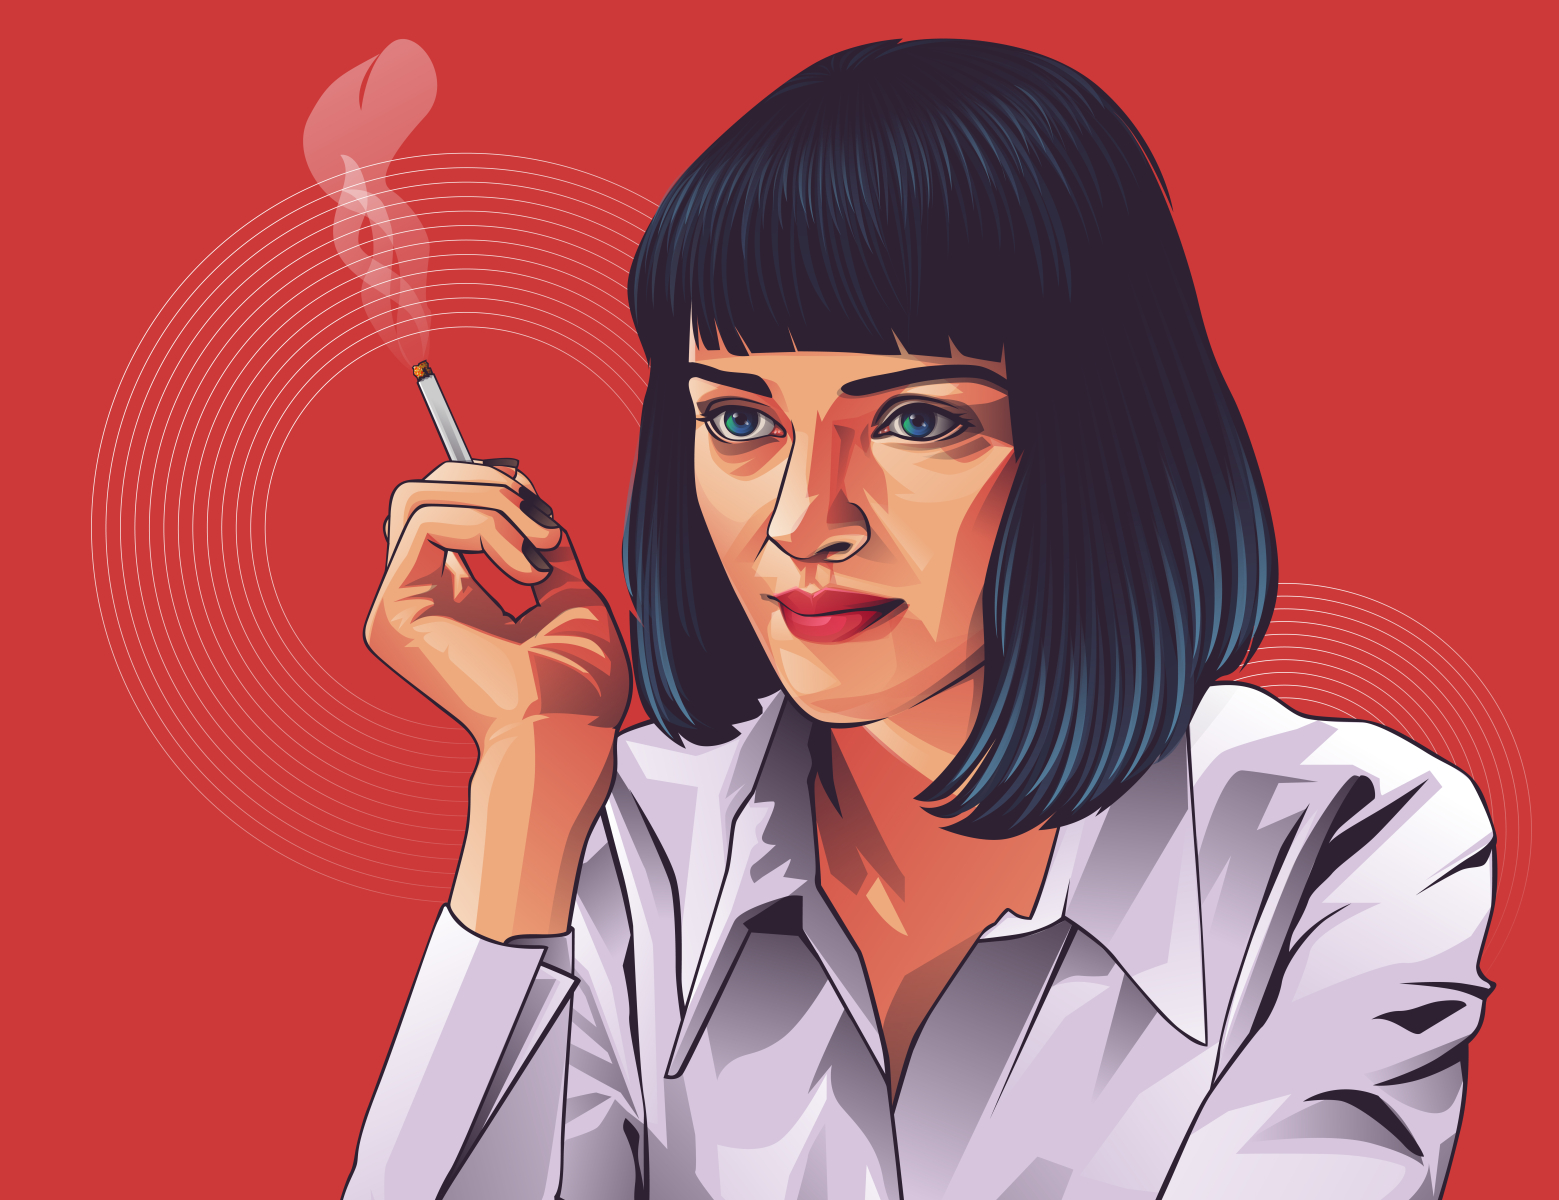  pulp  fiction  by Vinesh on Dribbble